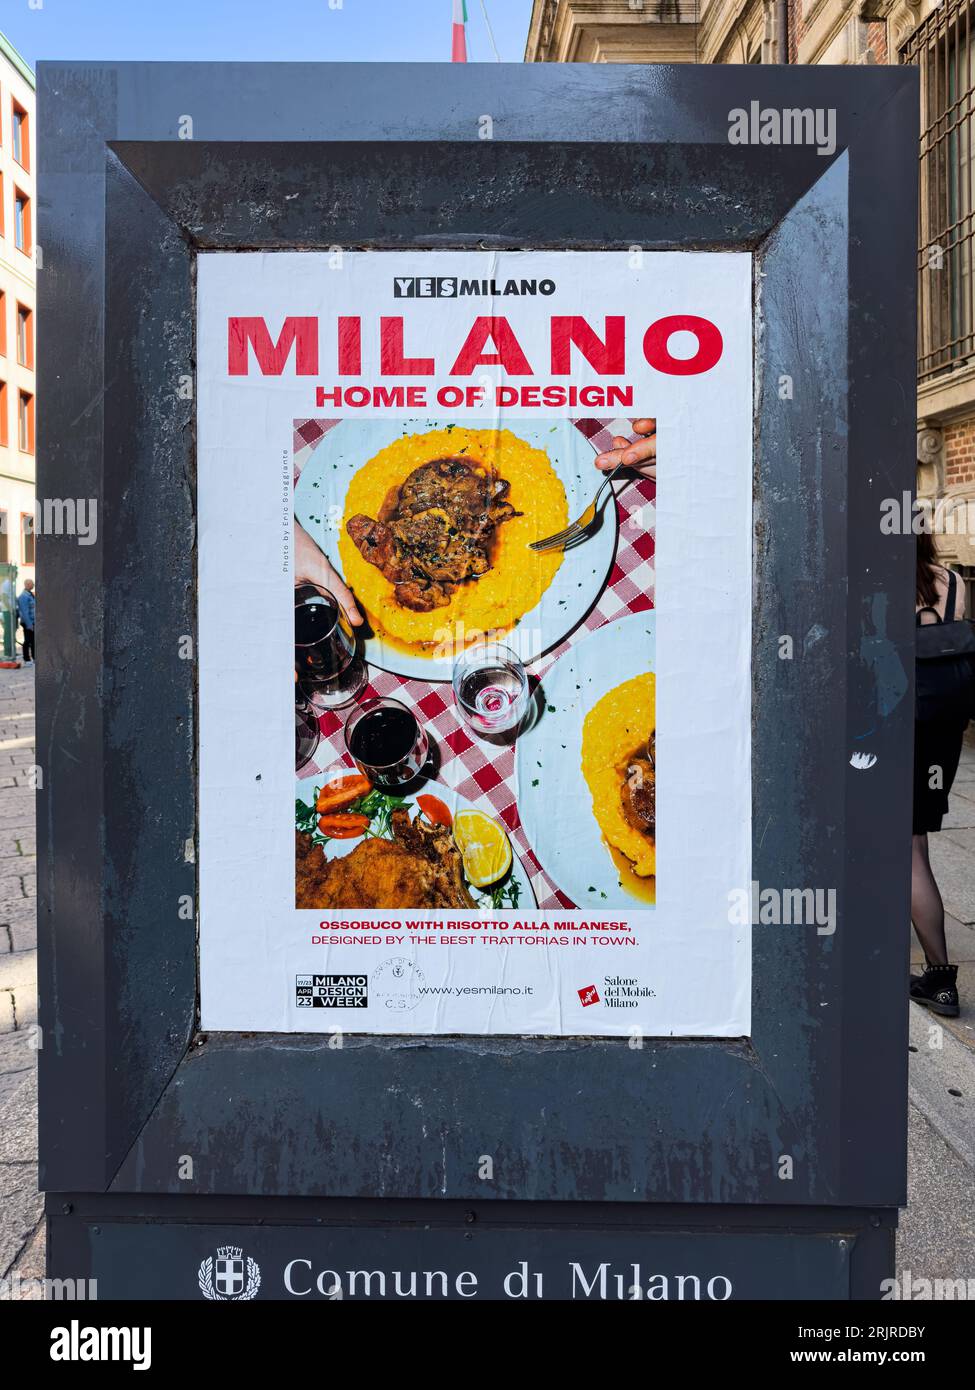 Milano Home of Design Poster on A Bus Stop during Milan Design